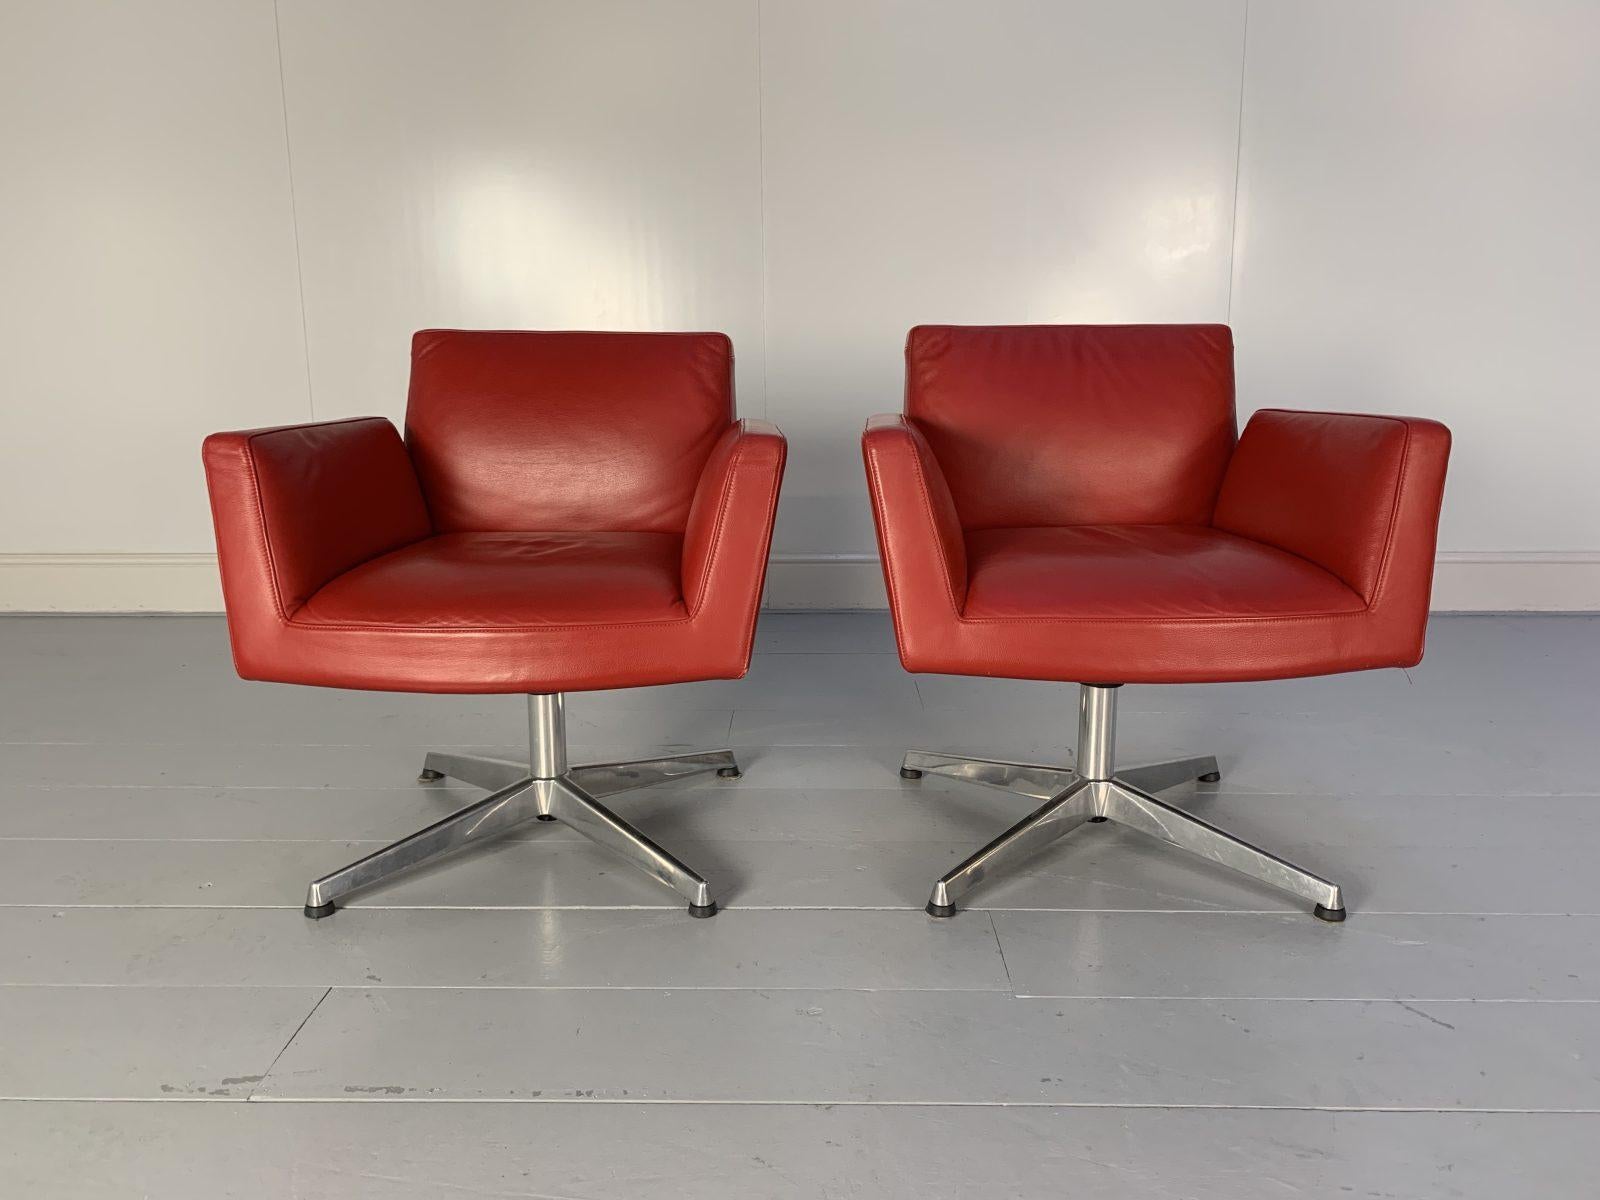 Hello Friends, and welcome to another unmissable offering from Lord Browns Furniture, the UK’s premier resource for fine Sofas and Chairs.
On offer on this occasion is an ultra-rare identical-pair of “Chancellor” Swivel Armchairs from the world